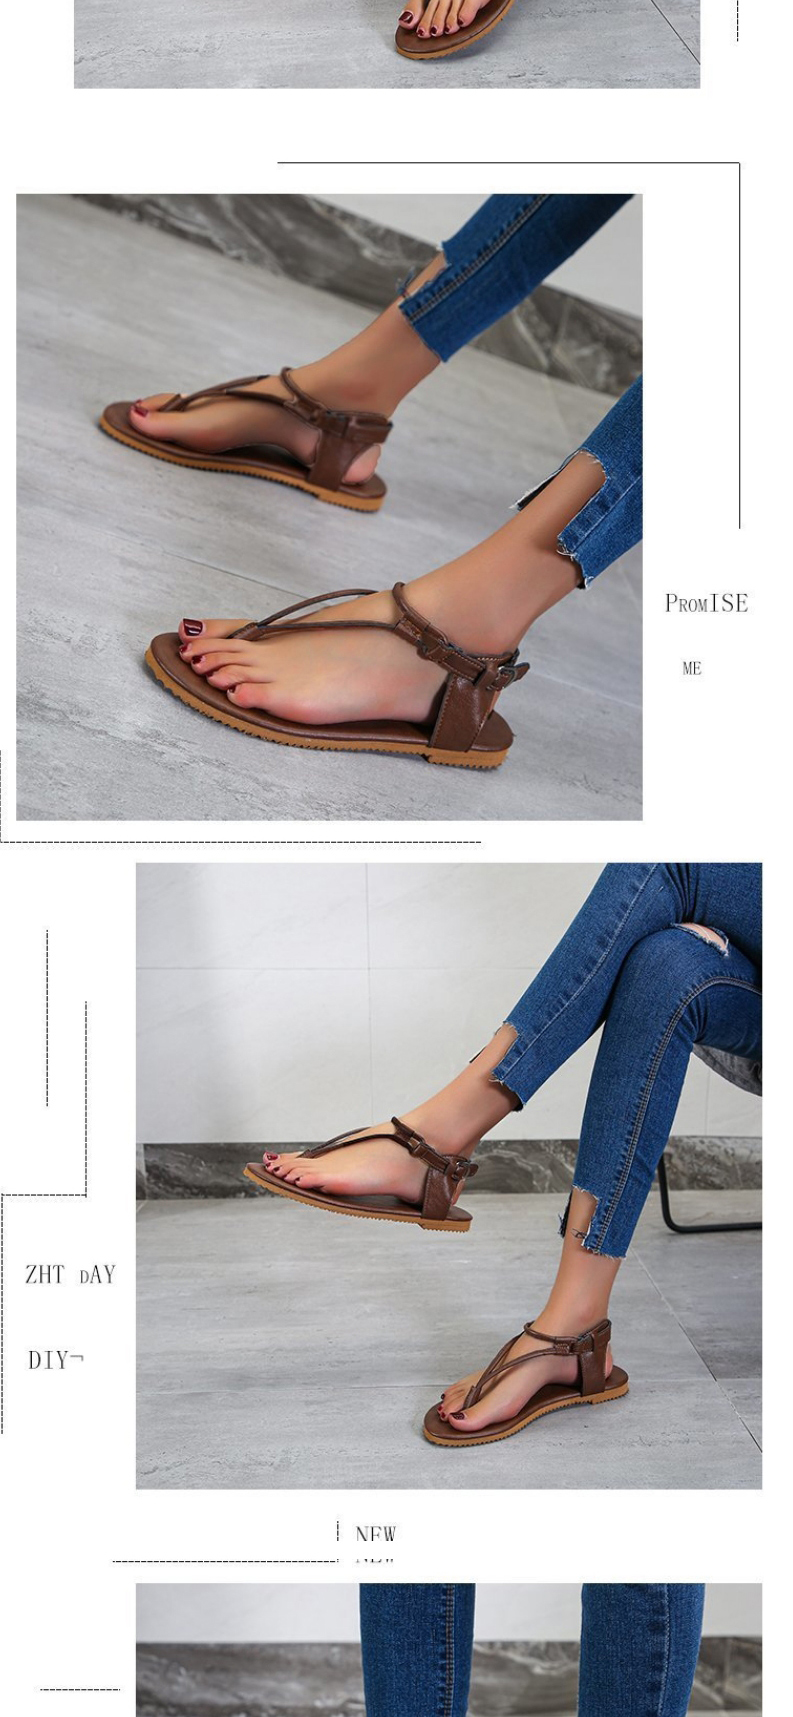 Fashion Coffee Flat-toe Clip-on Buckle Sandals,Slippers